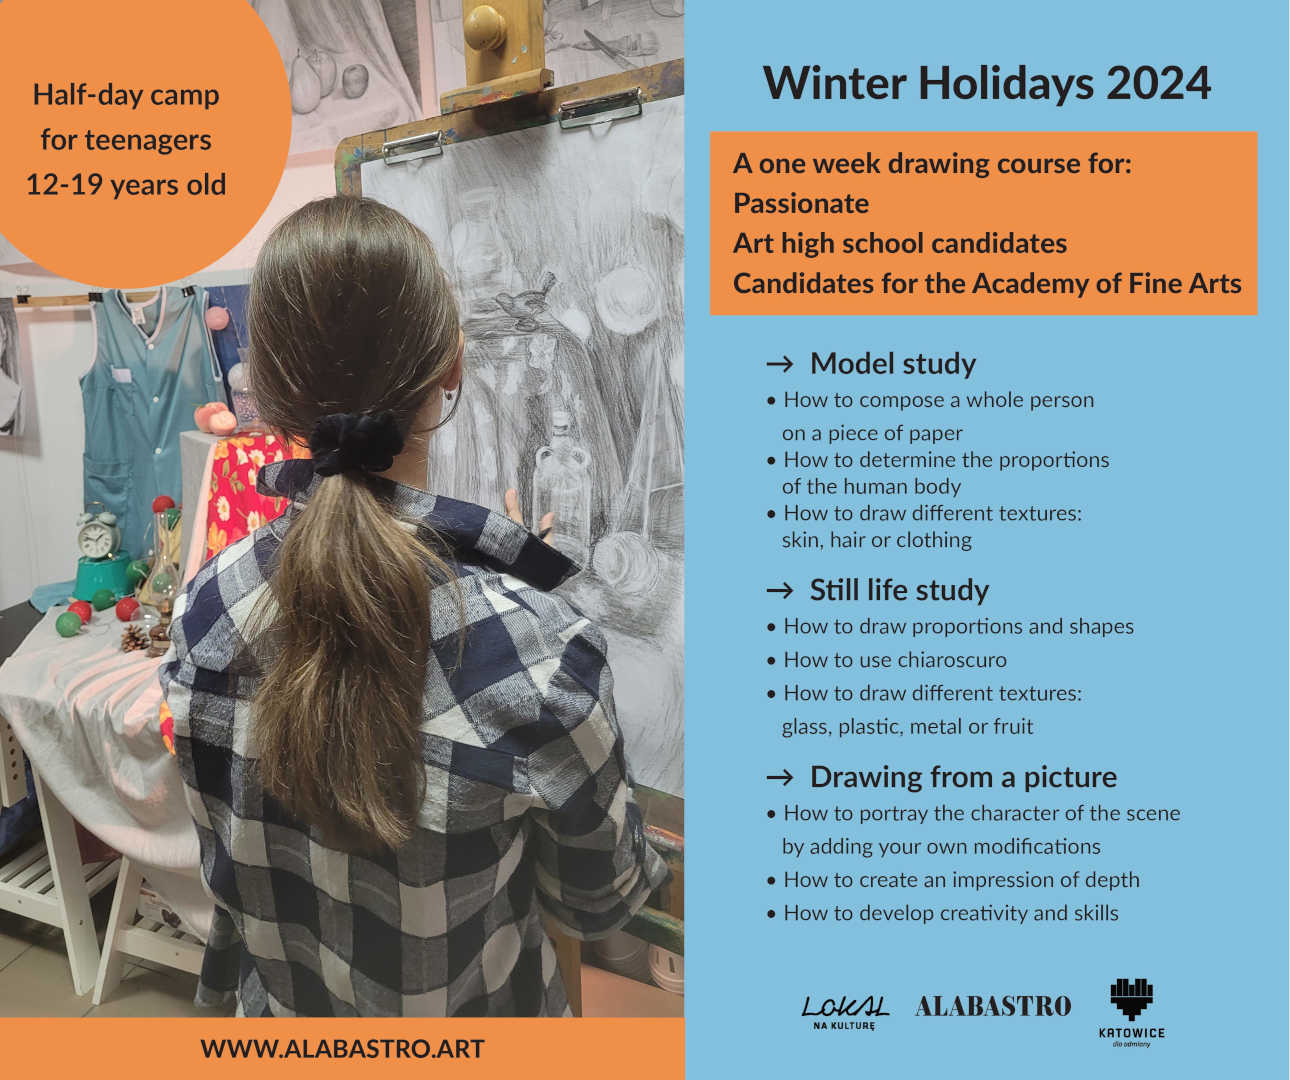 A participant learn how to draw at the 2024 winter holidays.